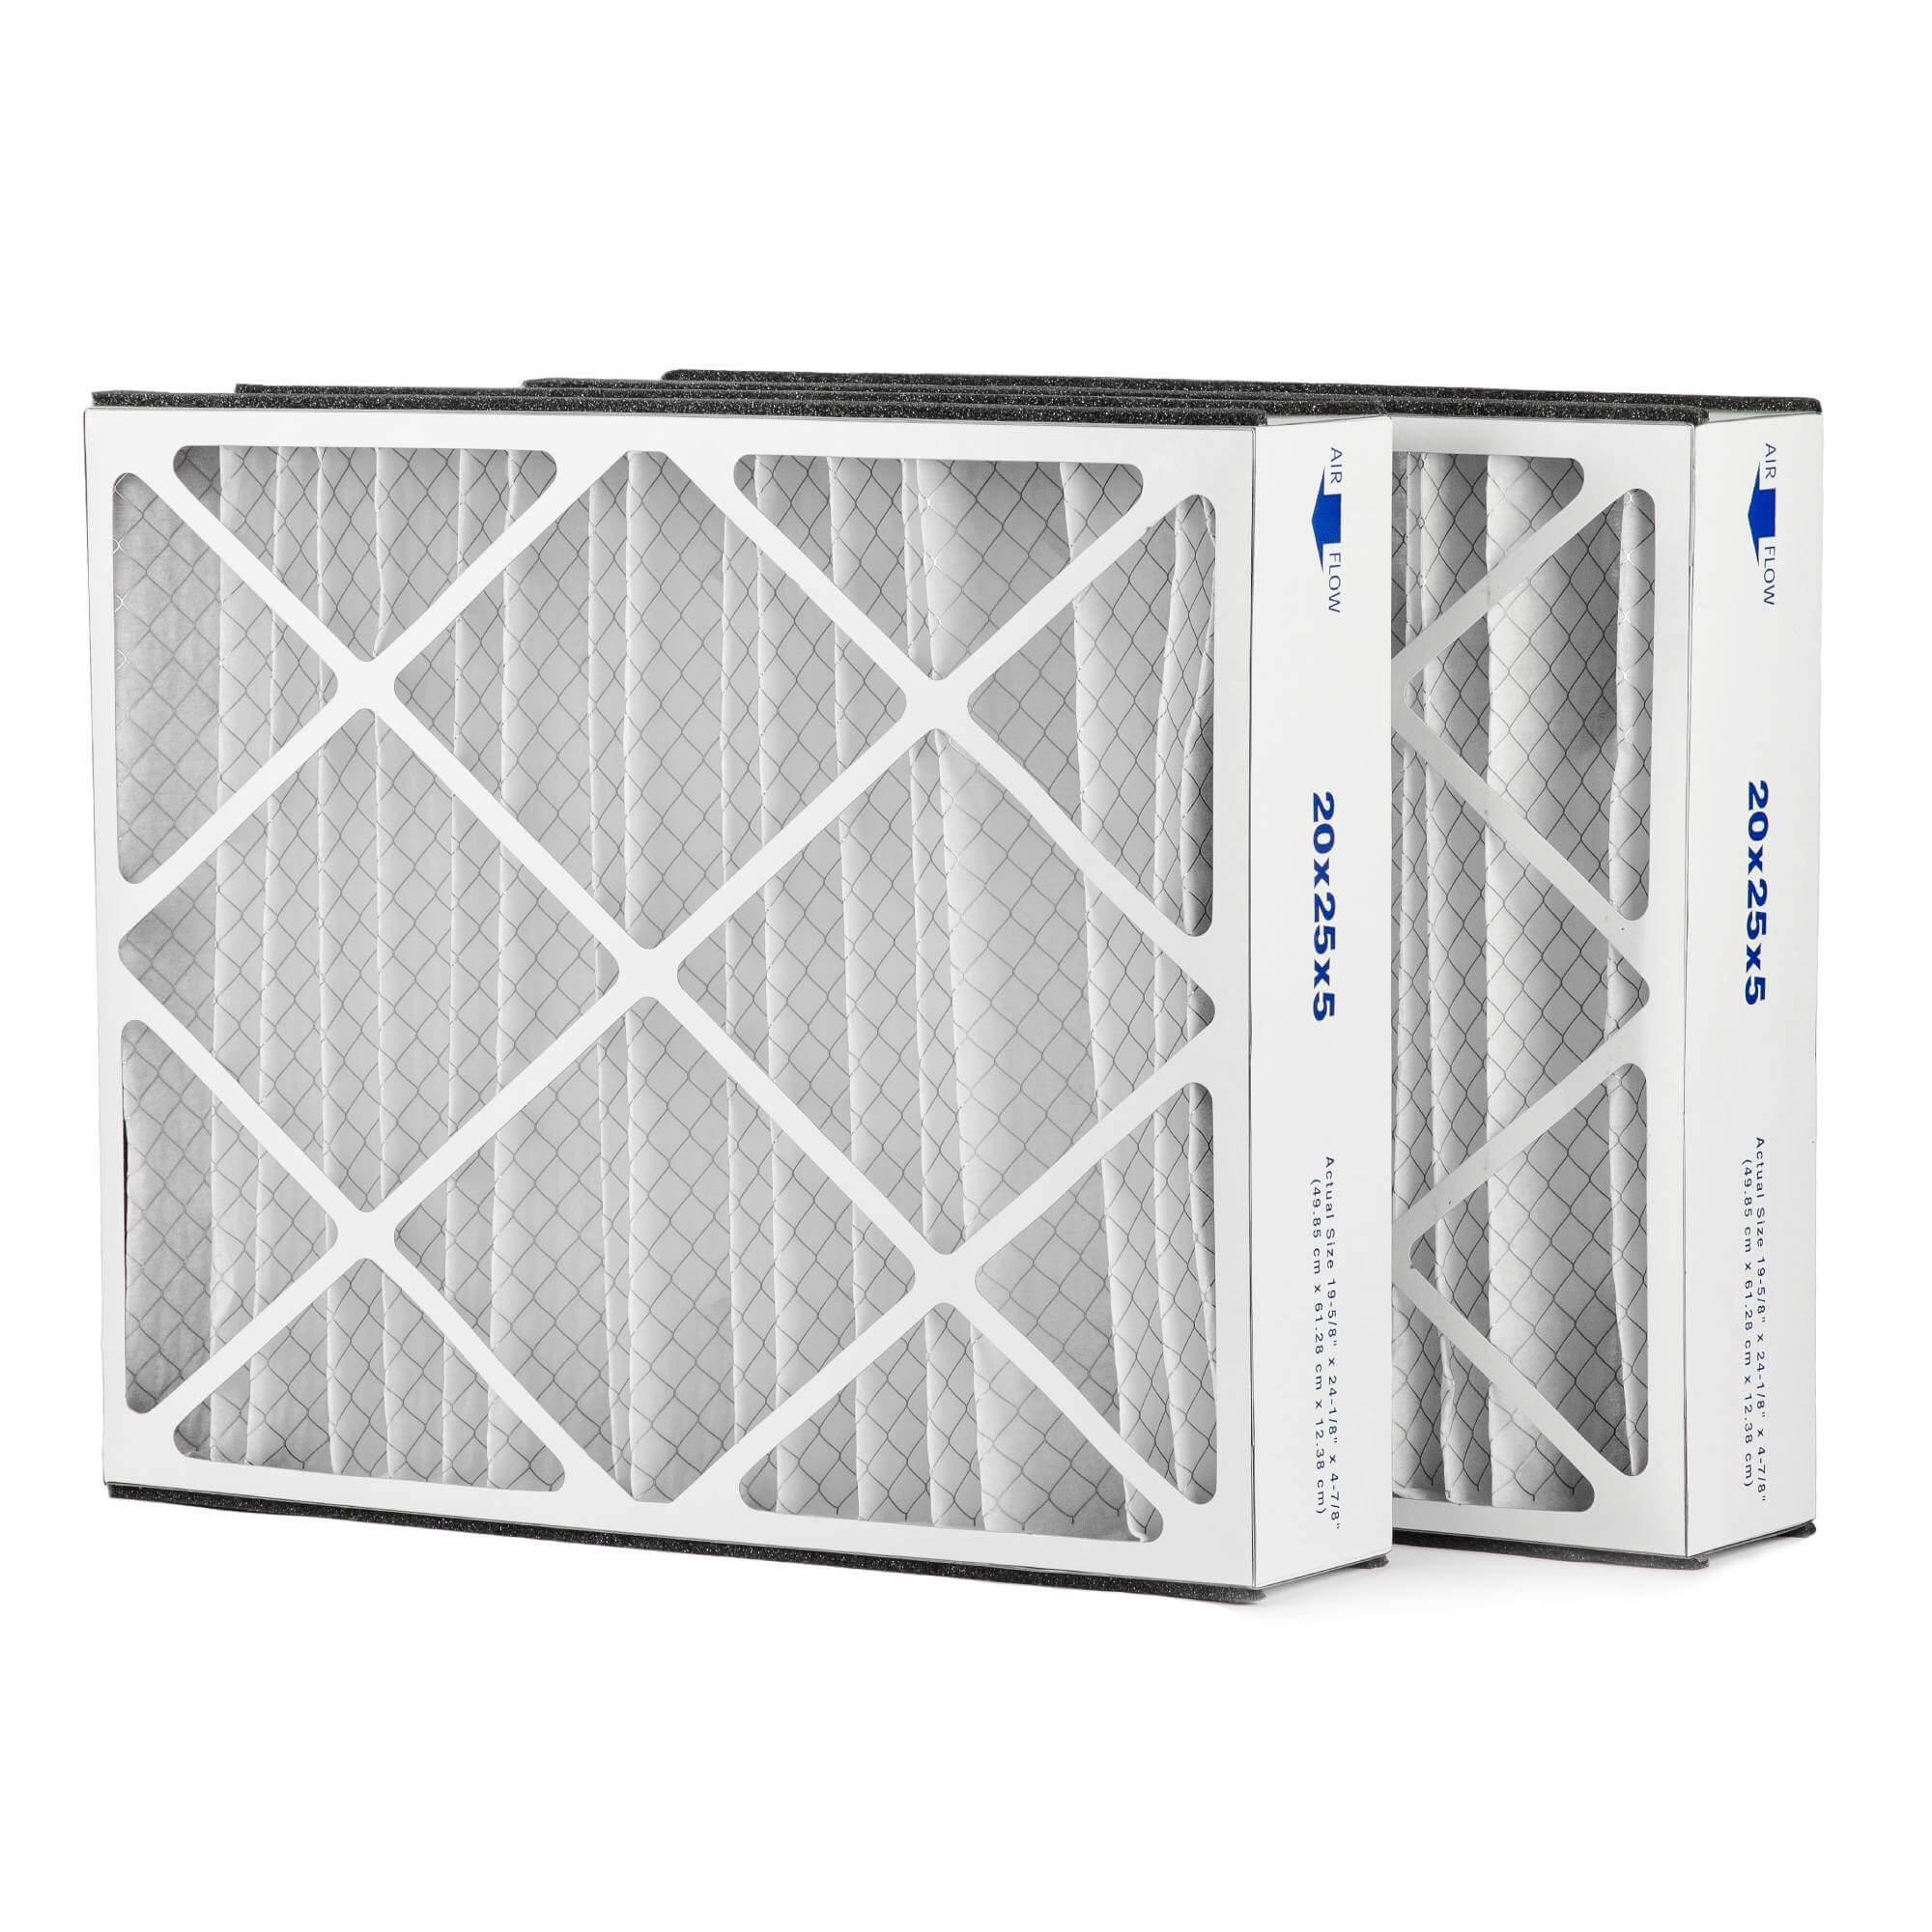 255649-102 Filters Fastr Replacement for Trion Air Bear 255649-102 20x25x5 MERV 8 Furnace & AC Air Filter - 2-Pack